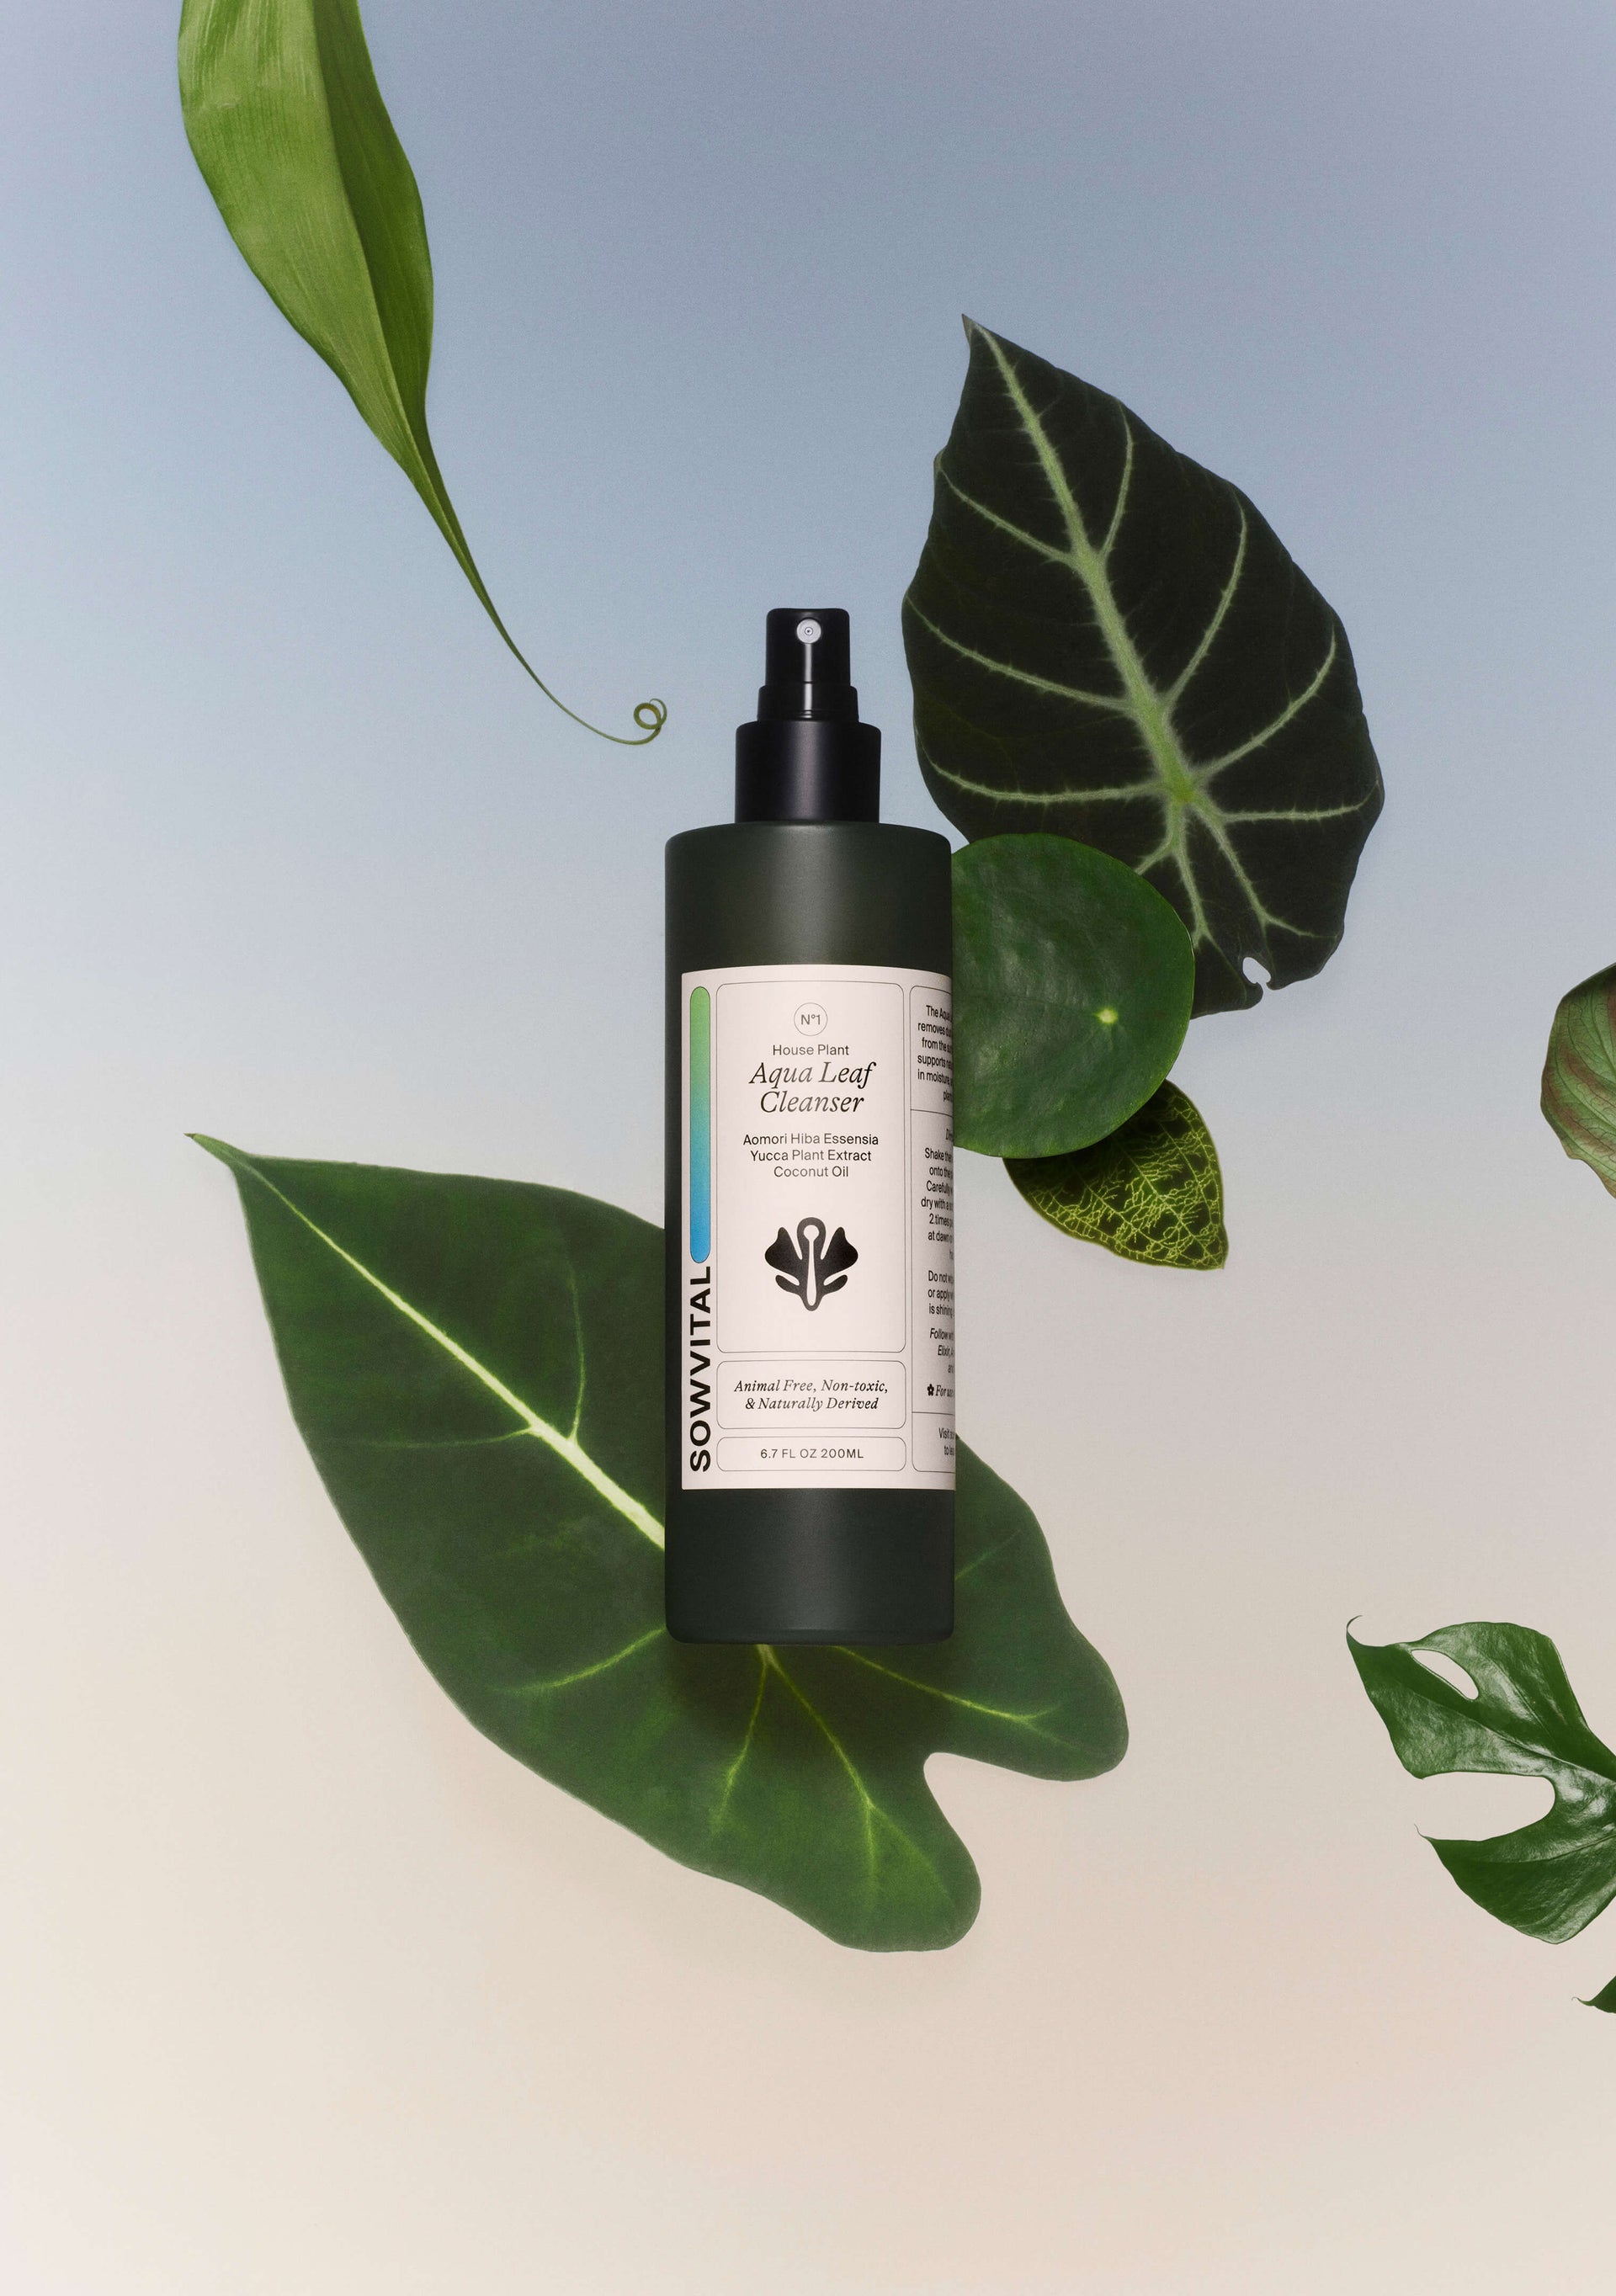 Sowvital aqua leaf cleanser with leaves from different kinds of plants.